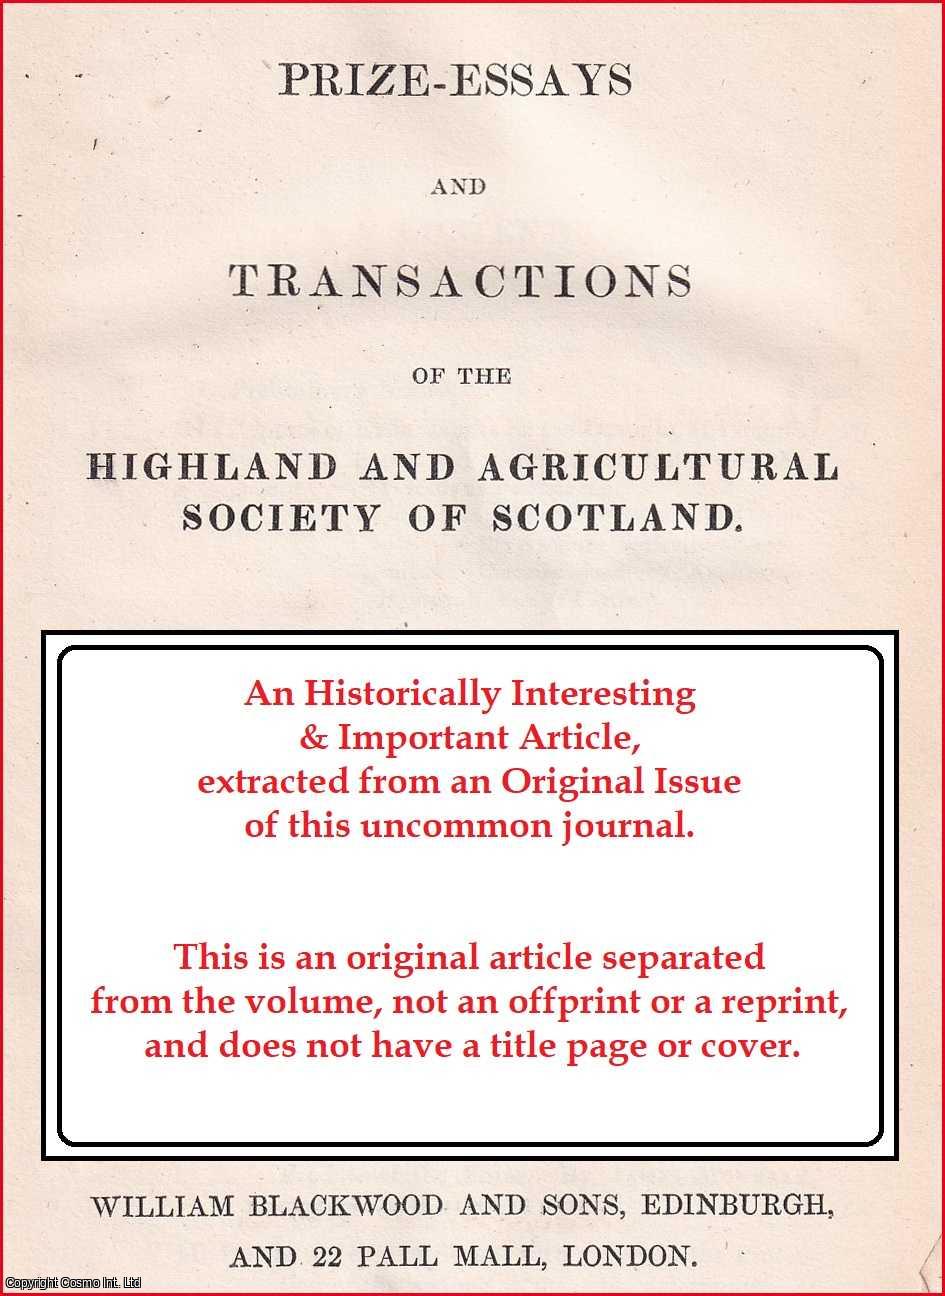 Mr. Carmichael of Raploch Farm, Stirlingshire. - A New Mode of Thickening Hedges, & Producing Branches on Trees, by Means of Incisions in the Bark. An uncommon original article from the Prize Essays and Transactions of the Highland Society of Scotland, 1832.